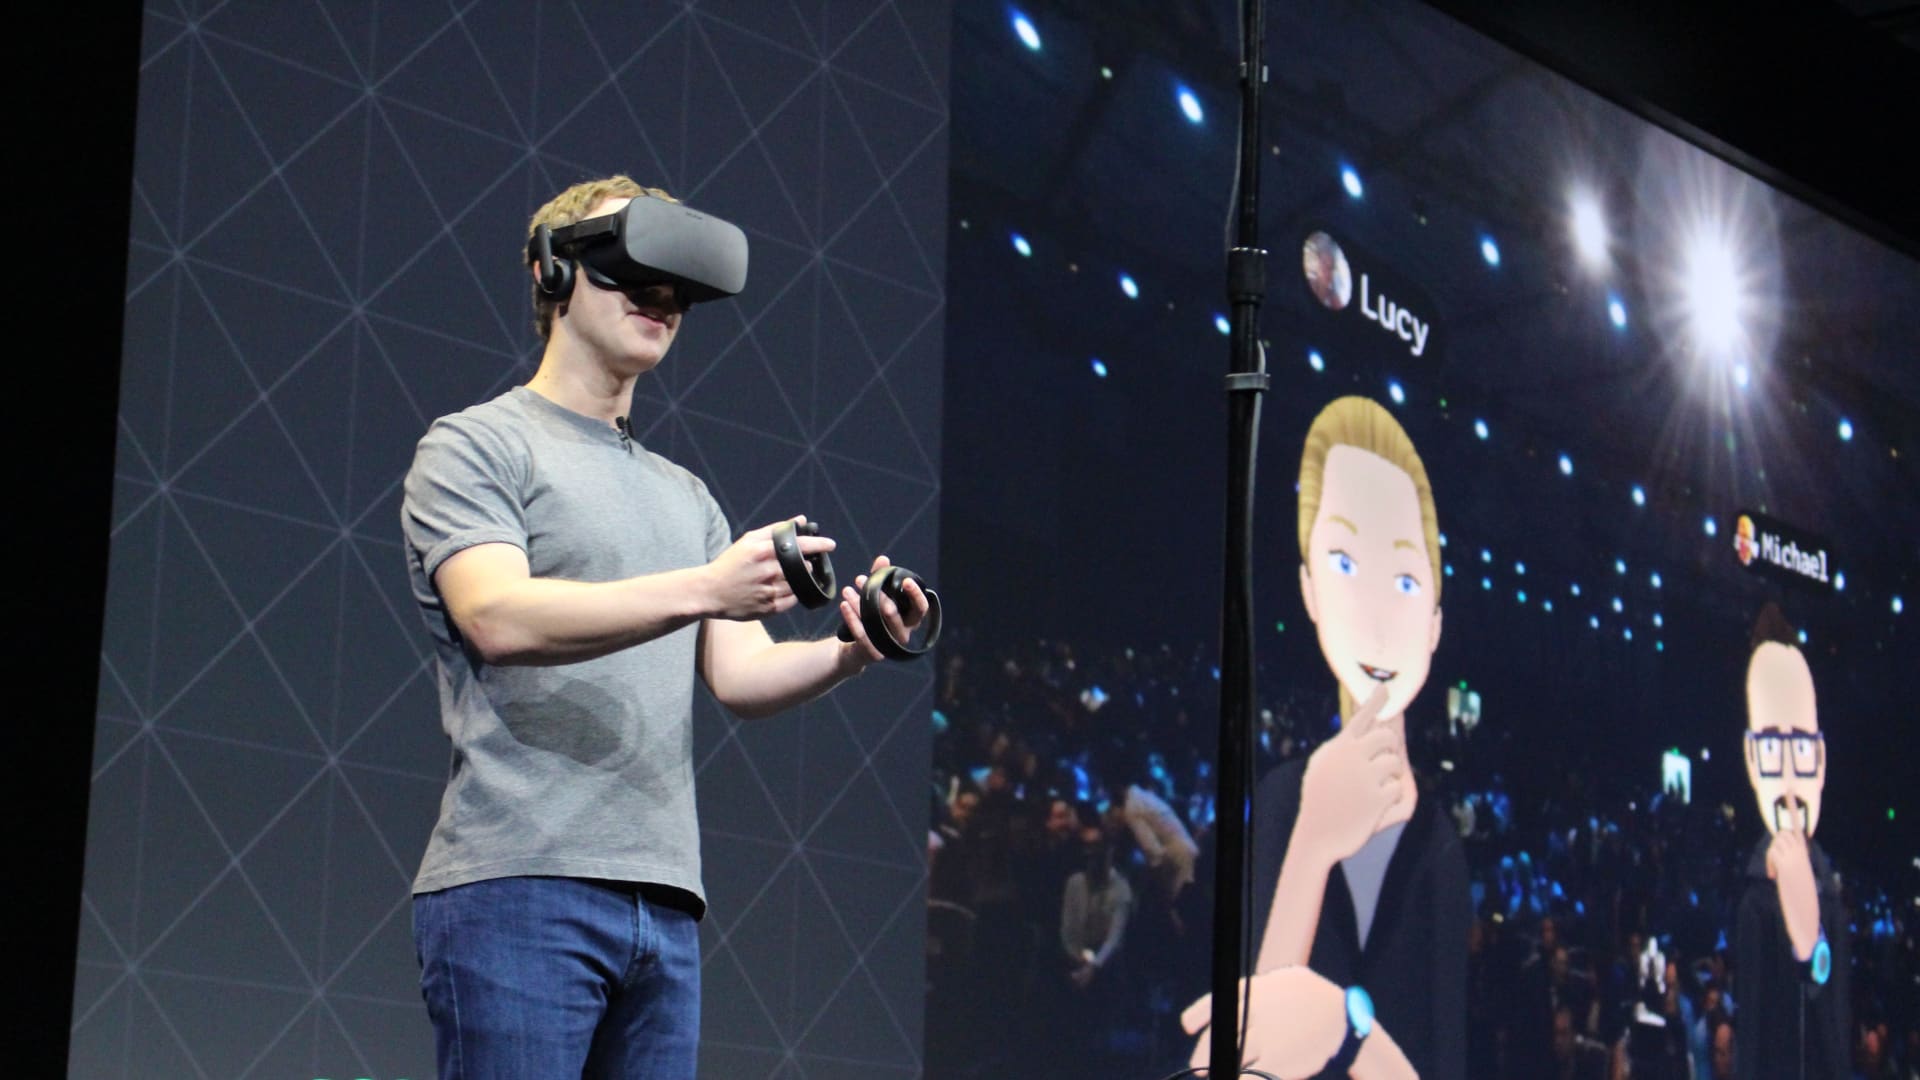 Meta     shows no signs of substantially trimming its losses from investing in the metaverse, as competition heightens between the Facebook parent and